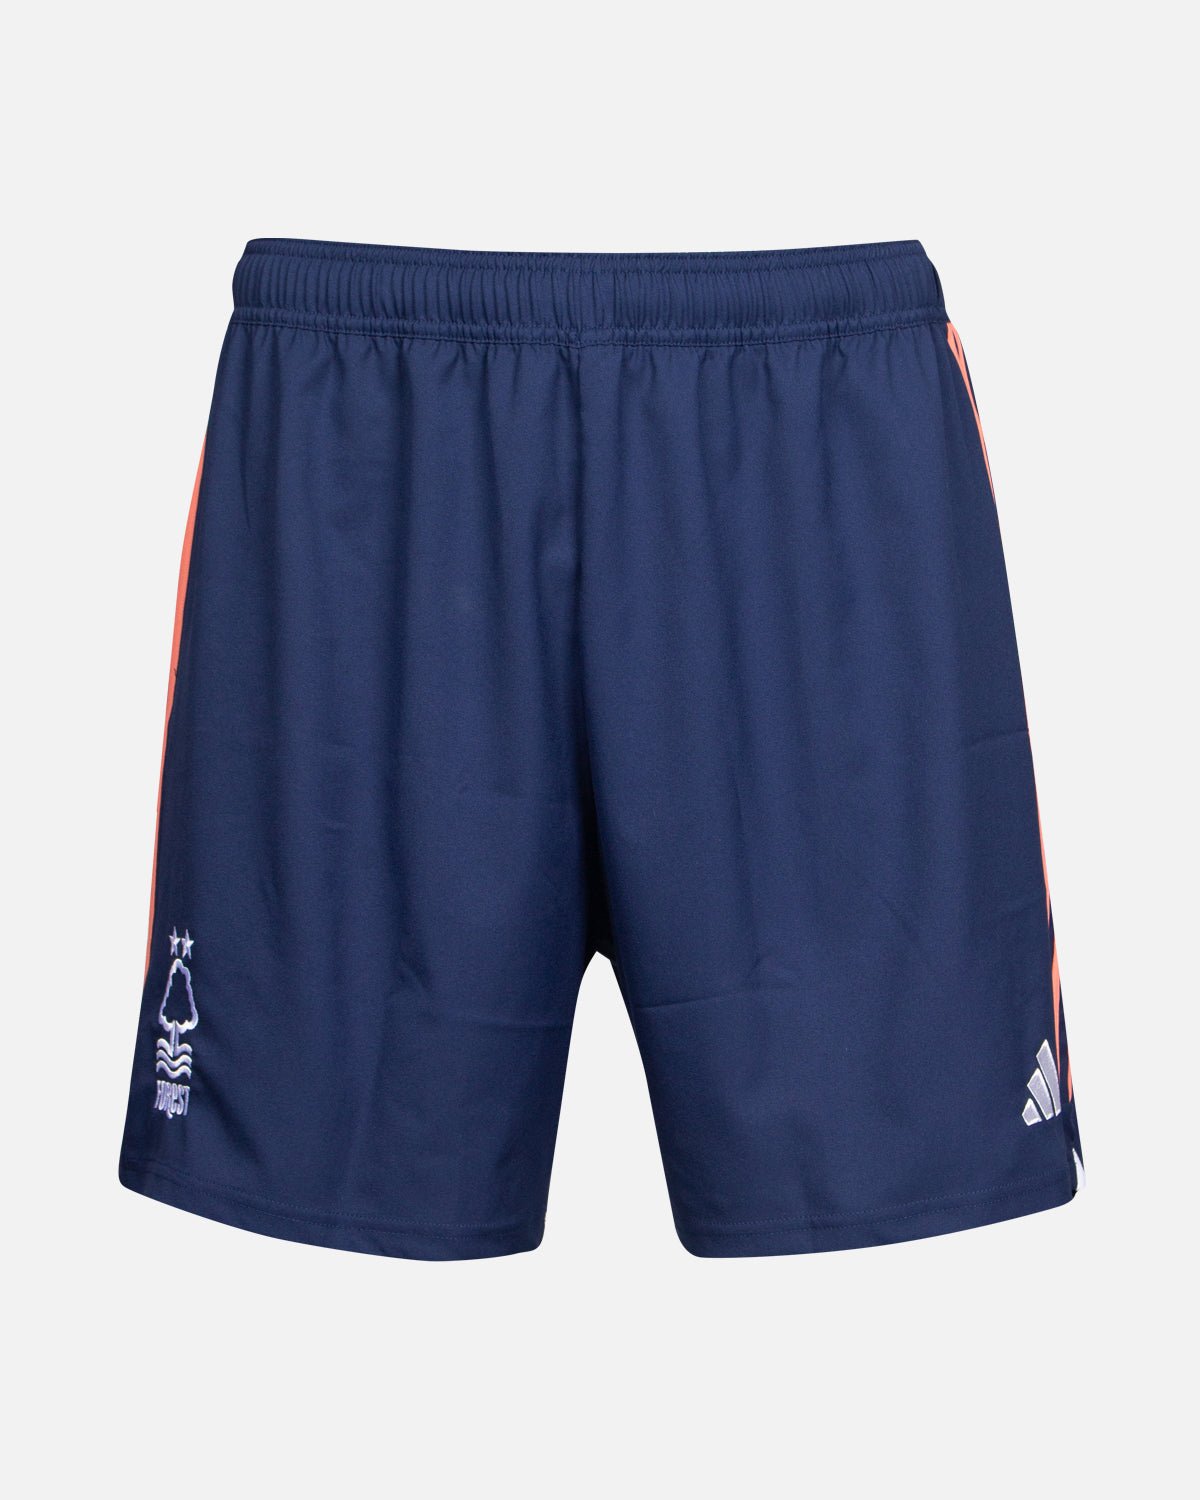 NFFC Third Shorts 23-24 - Nottingham Forest FC